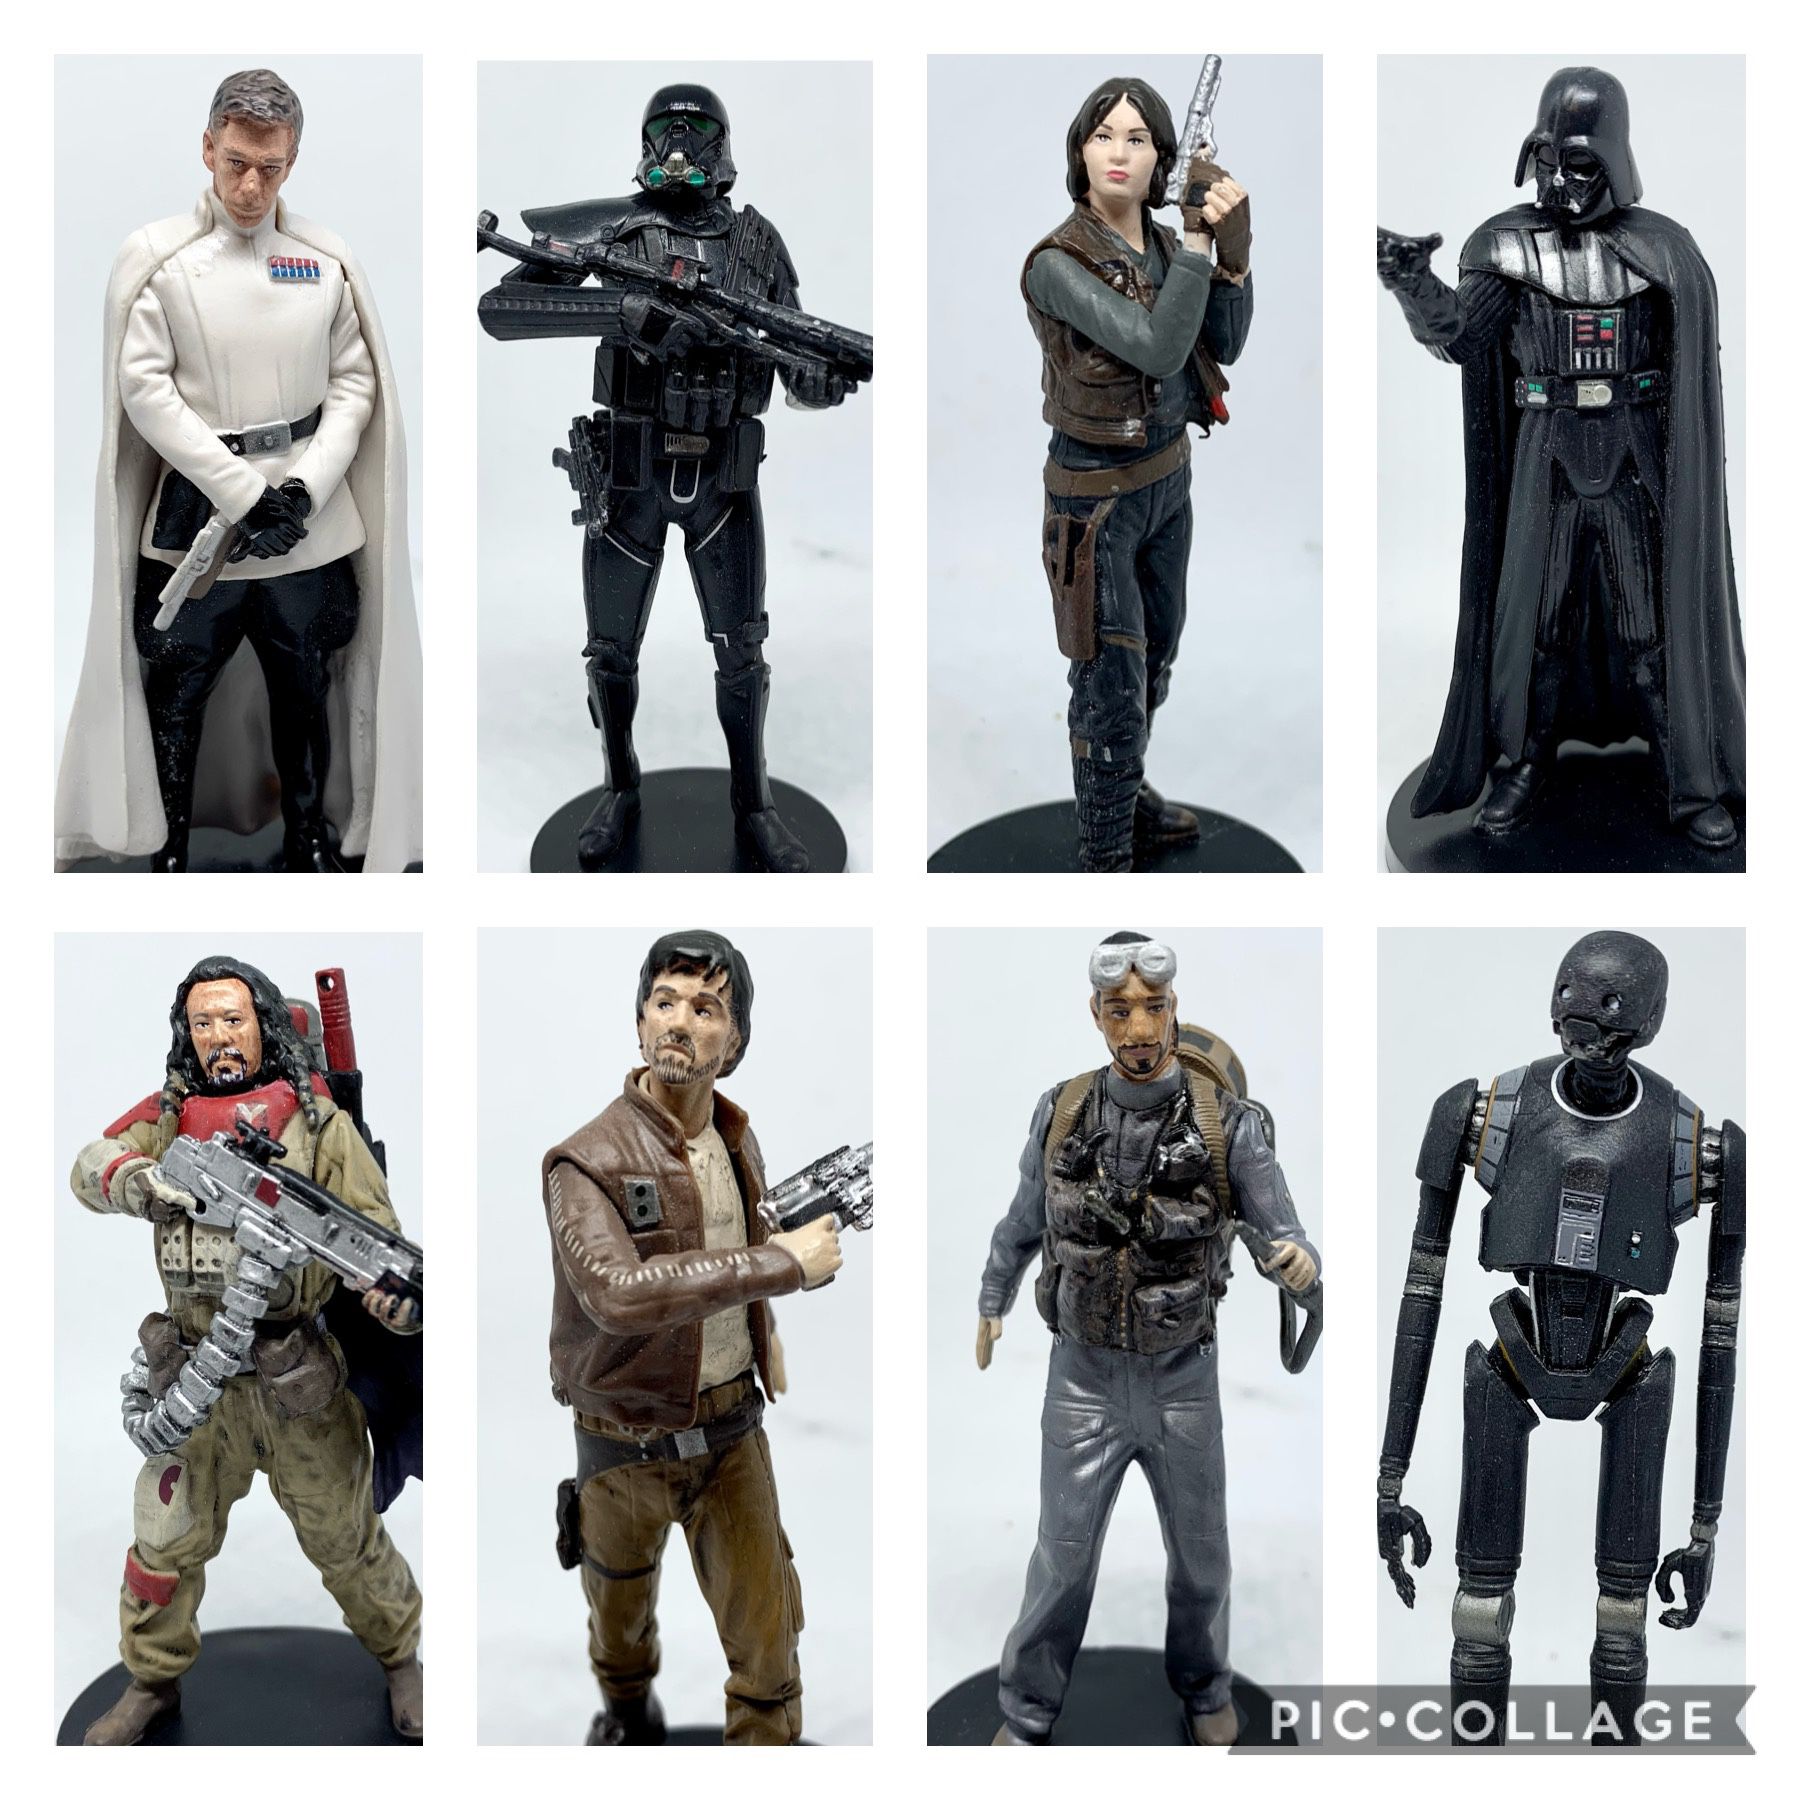 Disney Stores Exclusive - Rogue One: A Star Wars Story - 3.75” PVC Figurine Lot - 8 figures